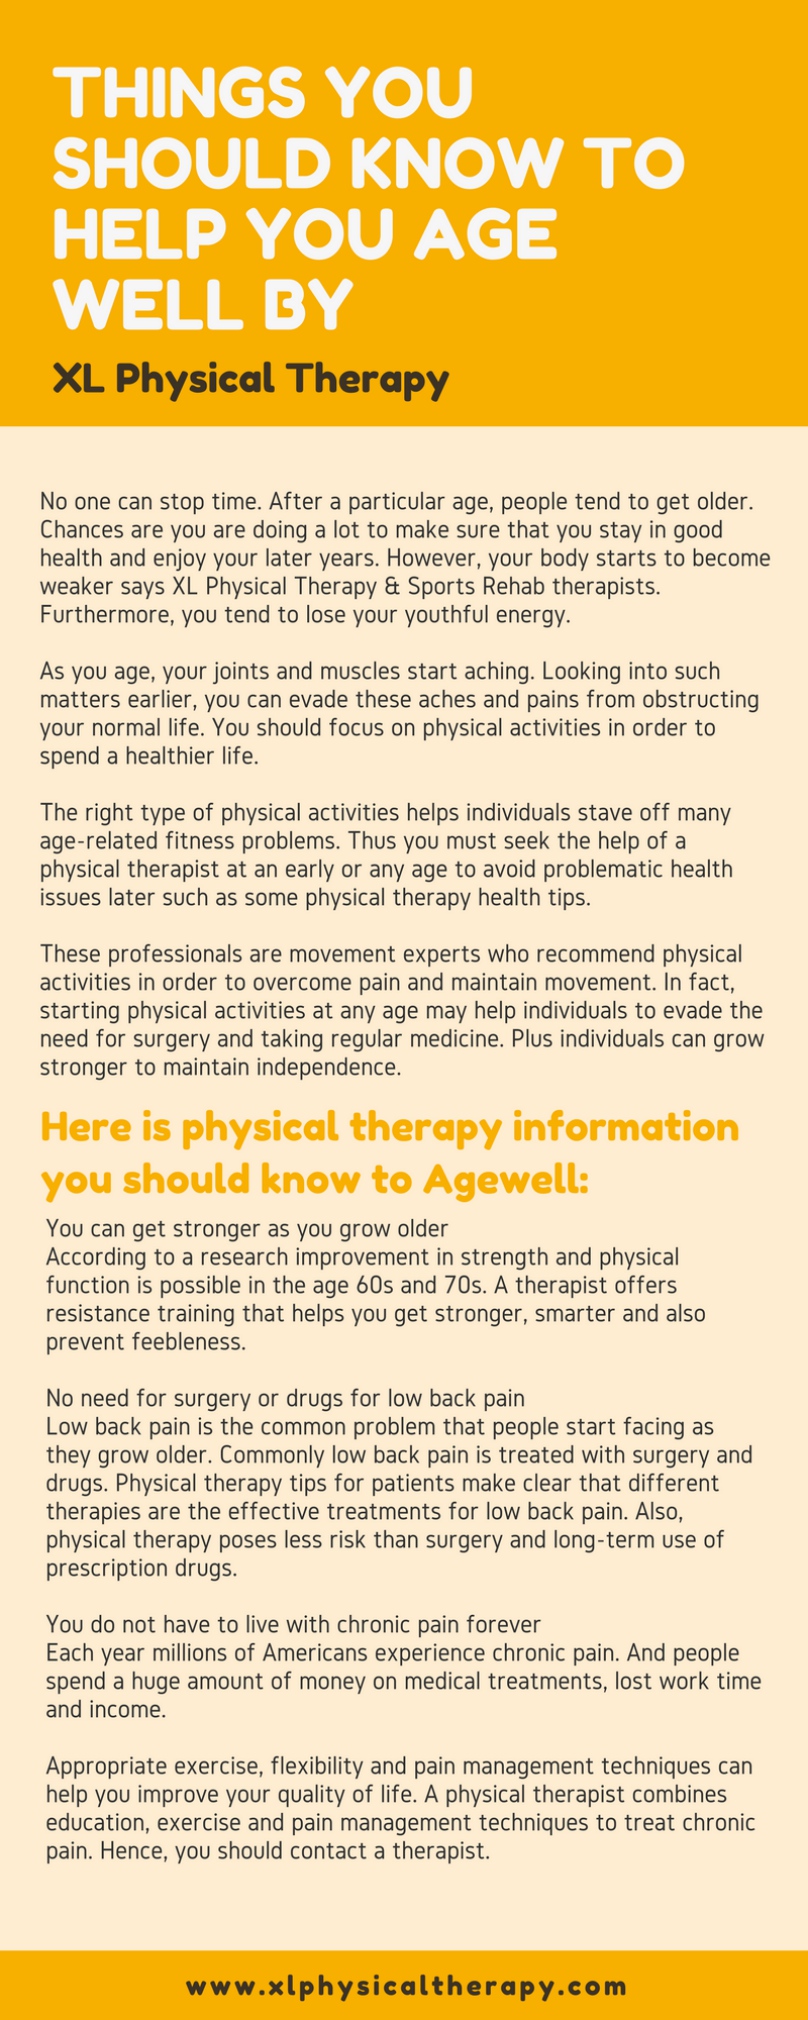 Things You Should Know to Help You Age Well by XL Physical Therapy Therapists